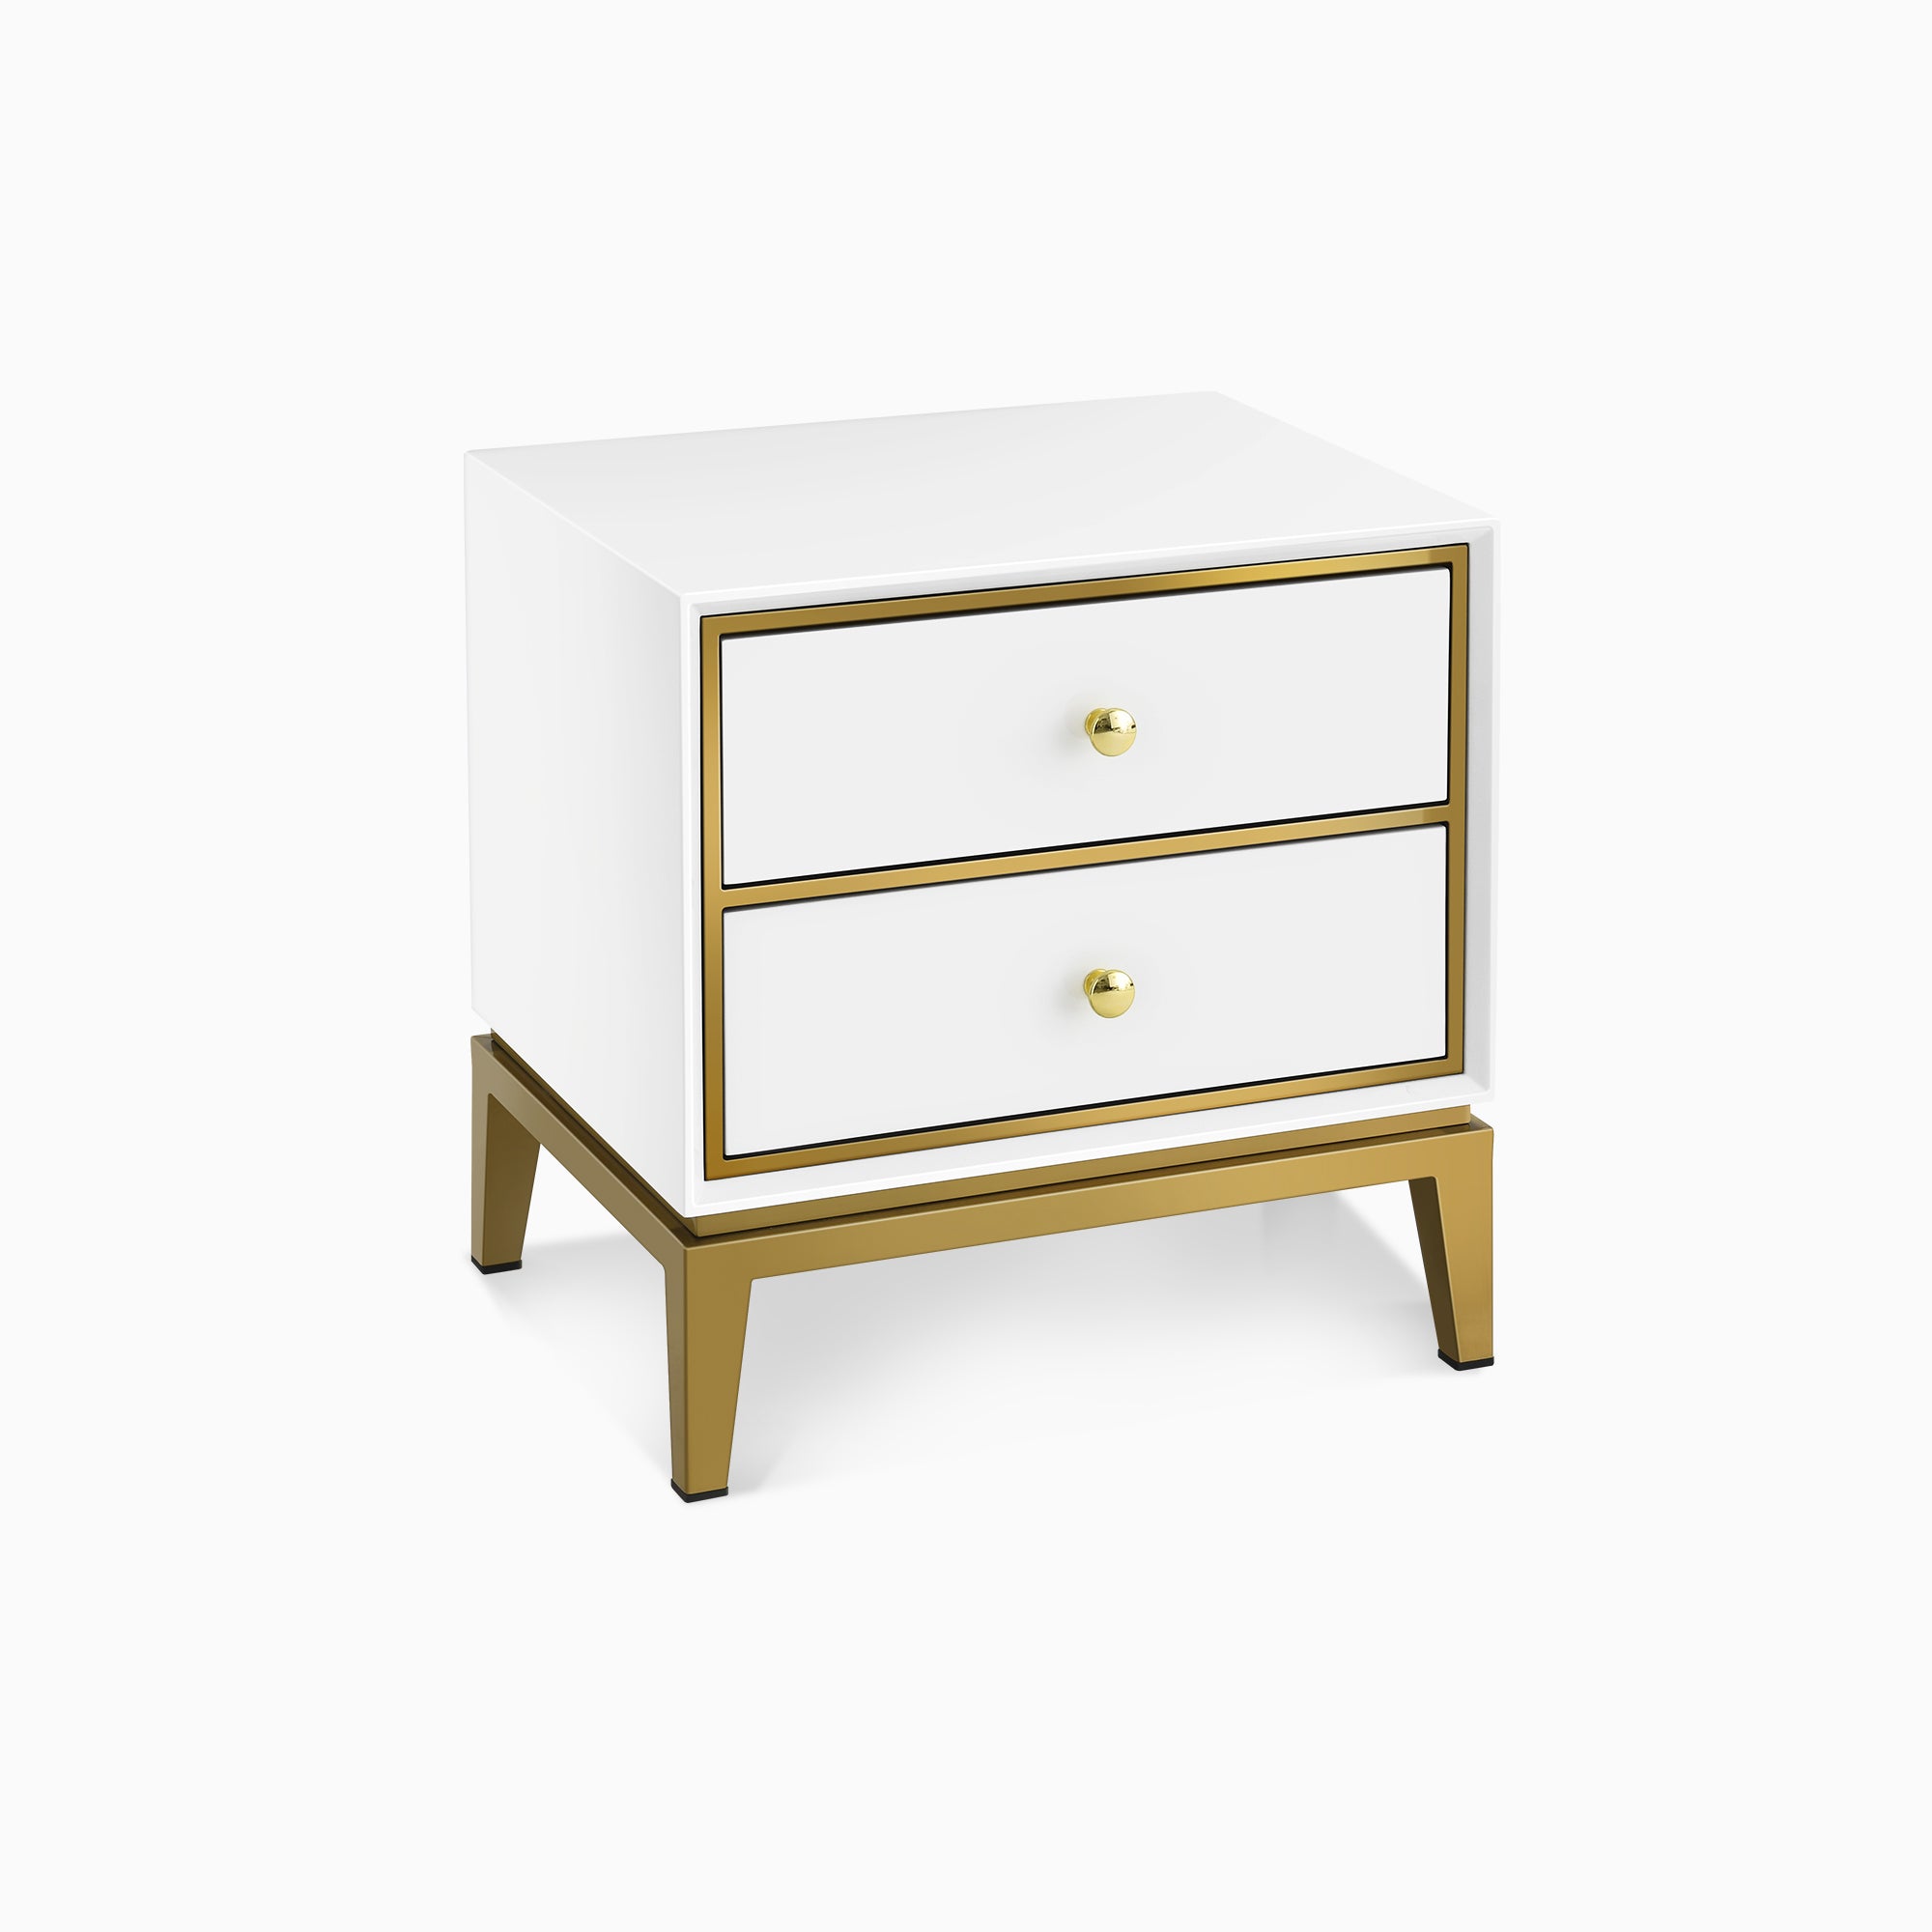 Odette 20" Modern Metal Base Nightstand with Solid Wood 2 Drawers, White-Gold